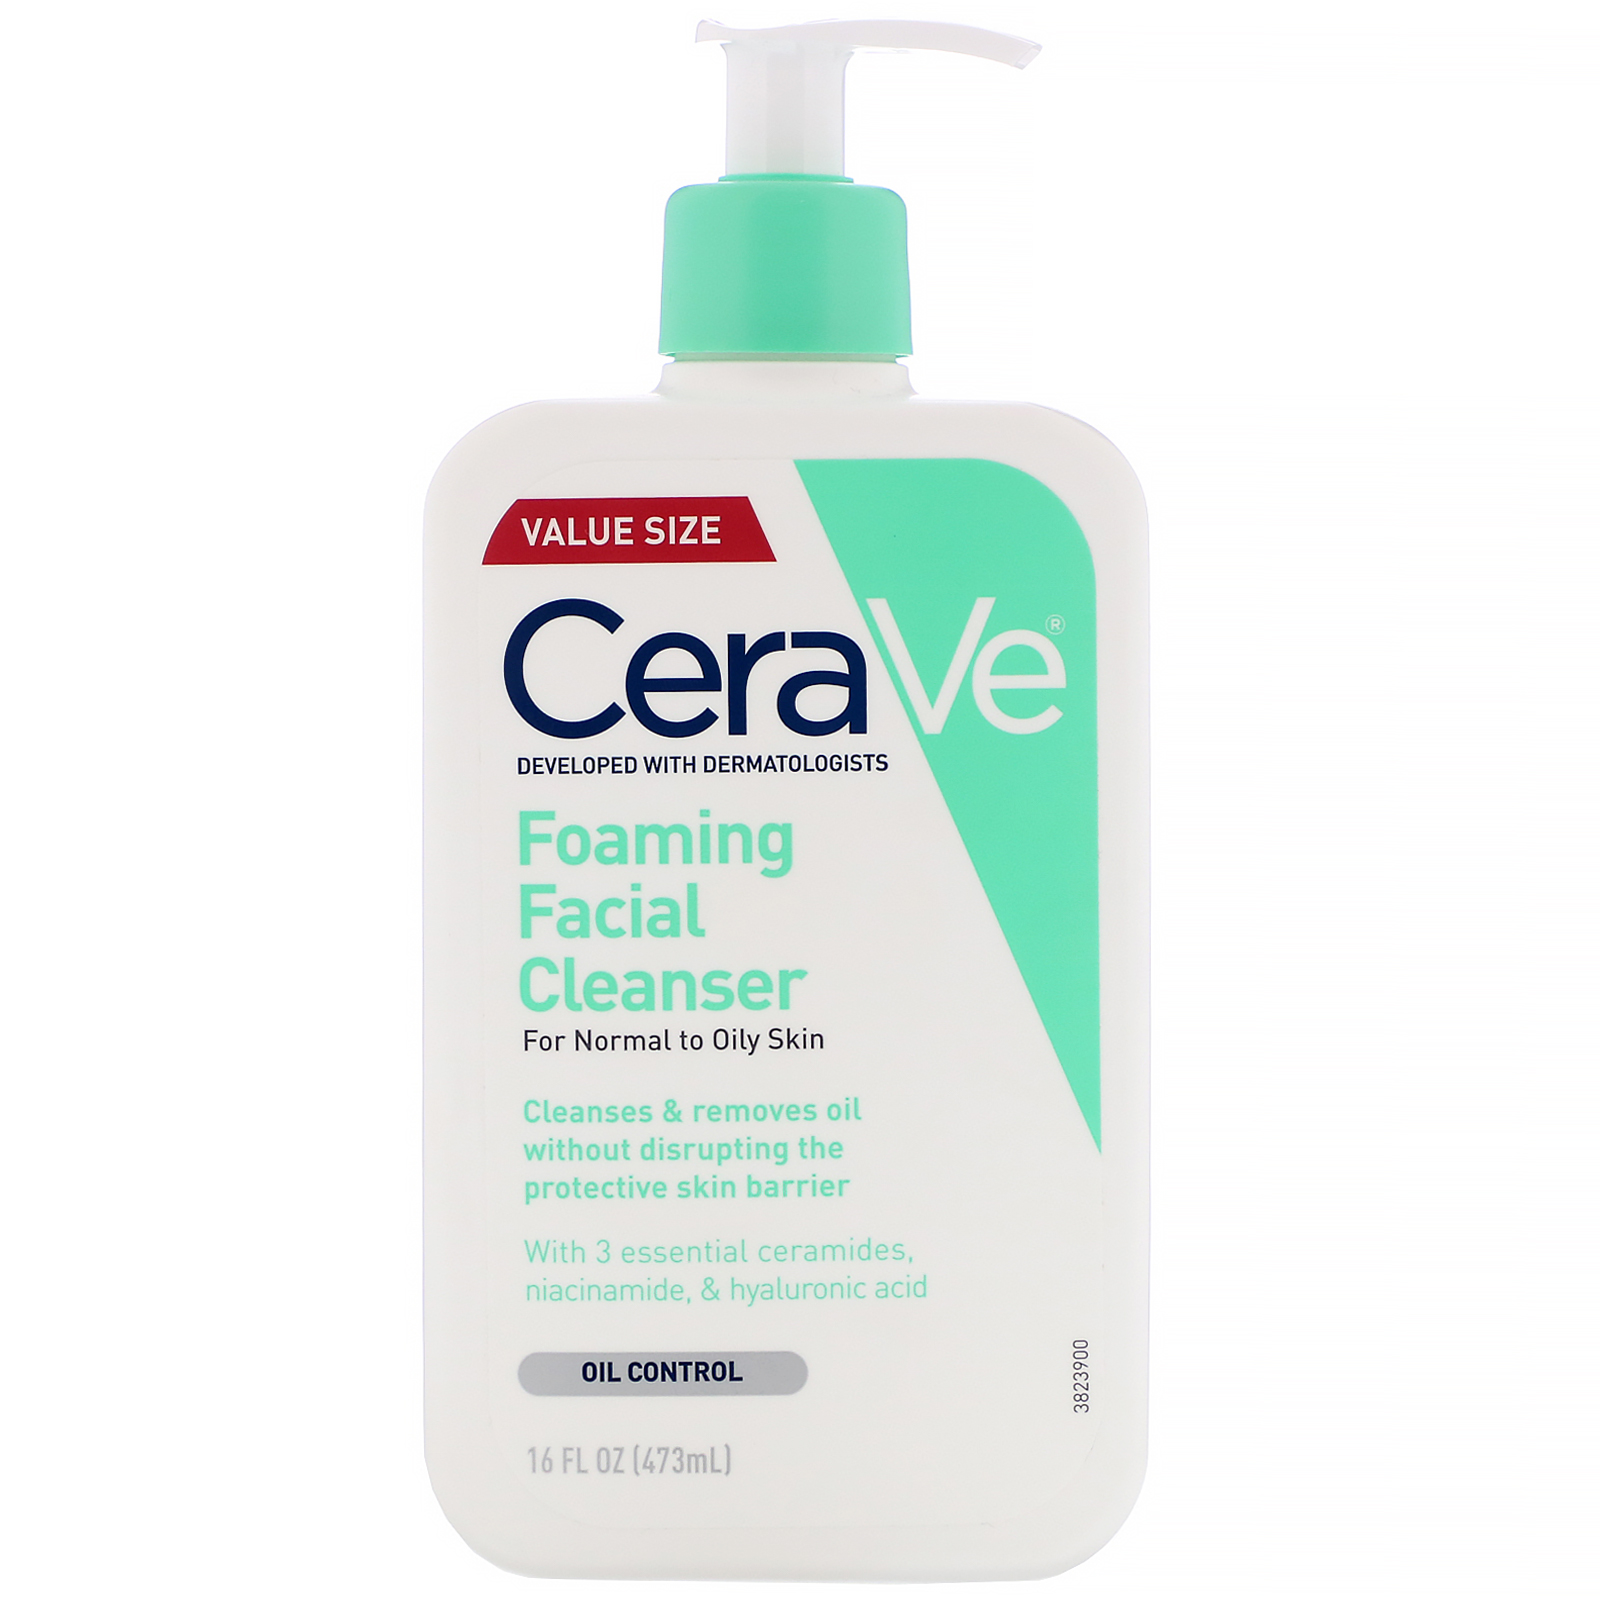 CeraVe, Foaming Facial Cleanser, For Normal to Oily Skin, 16 fl oz (473